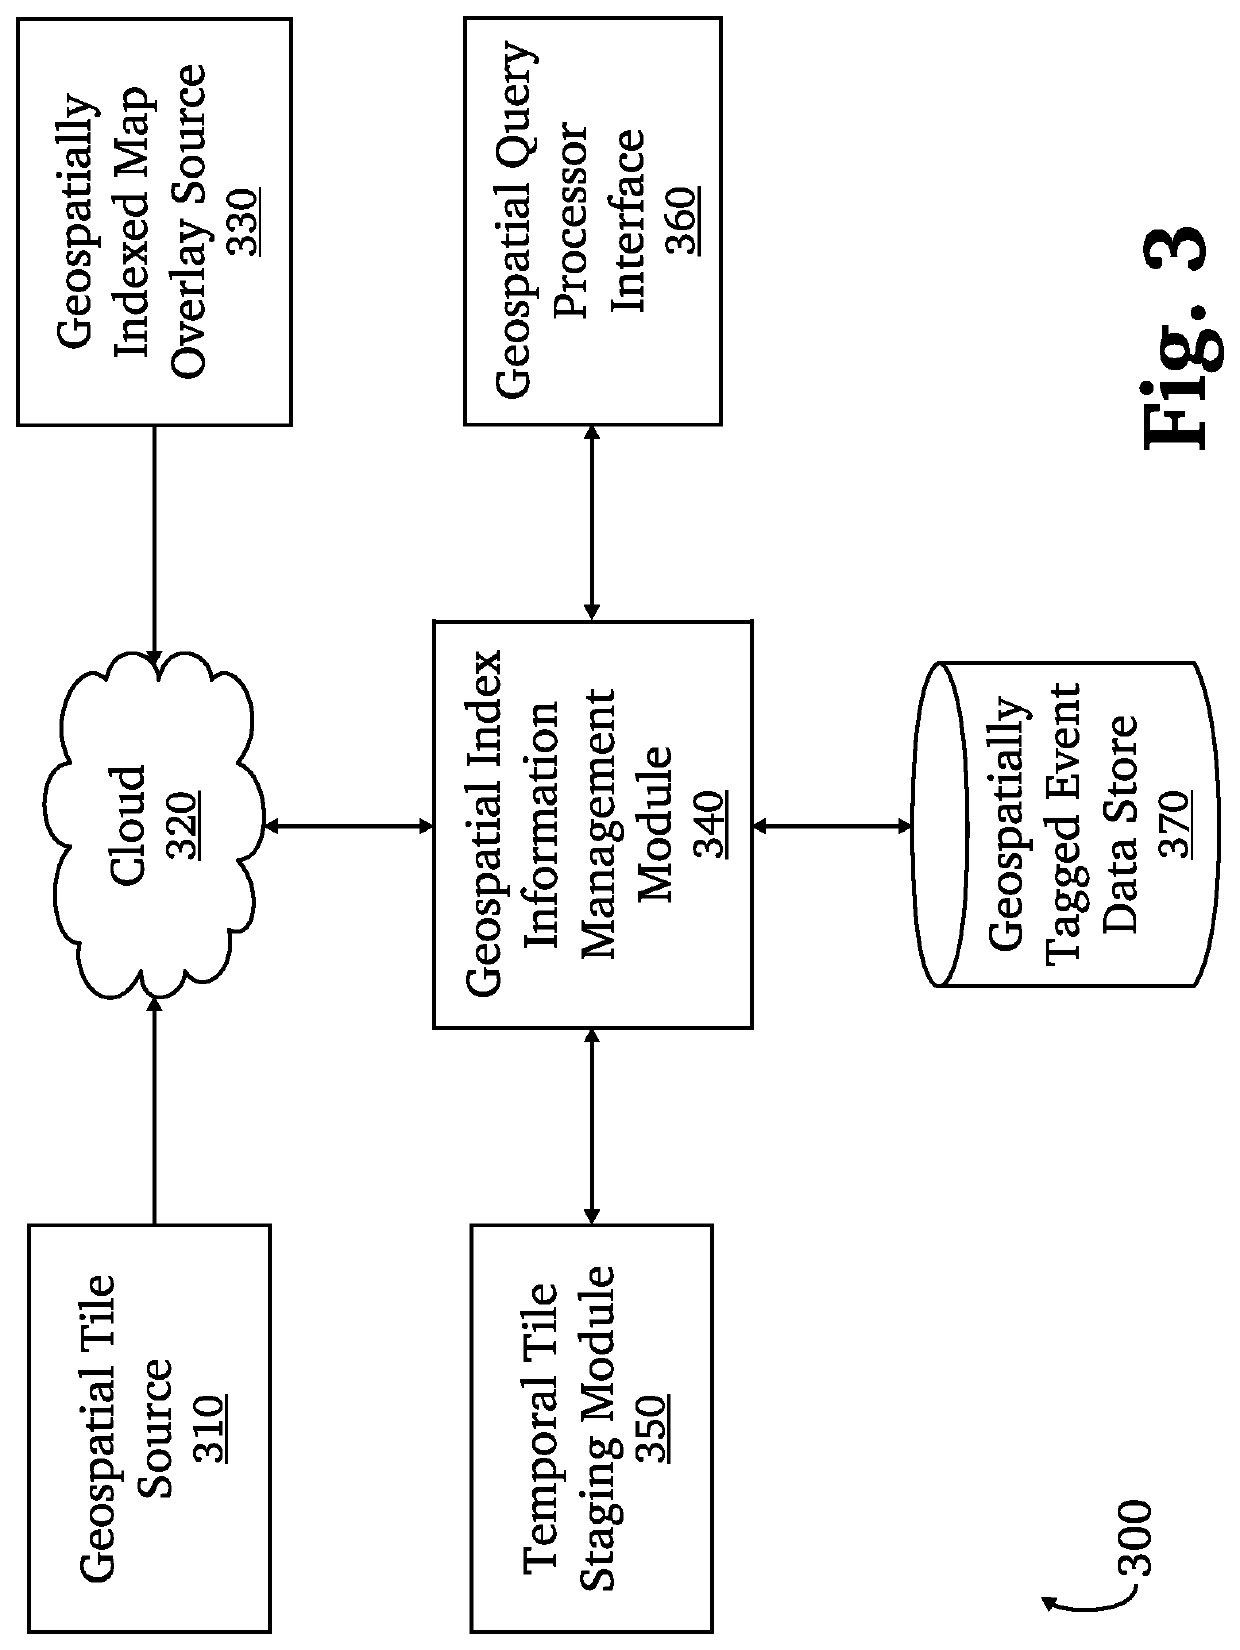 System and method for data extraction, processing, and management across multiple communication platforms